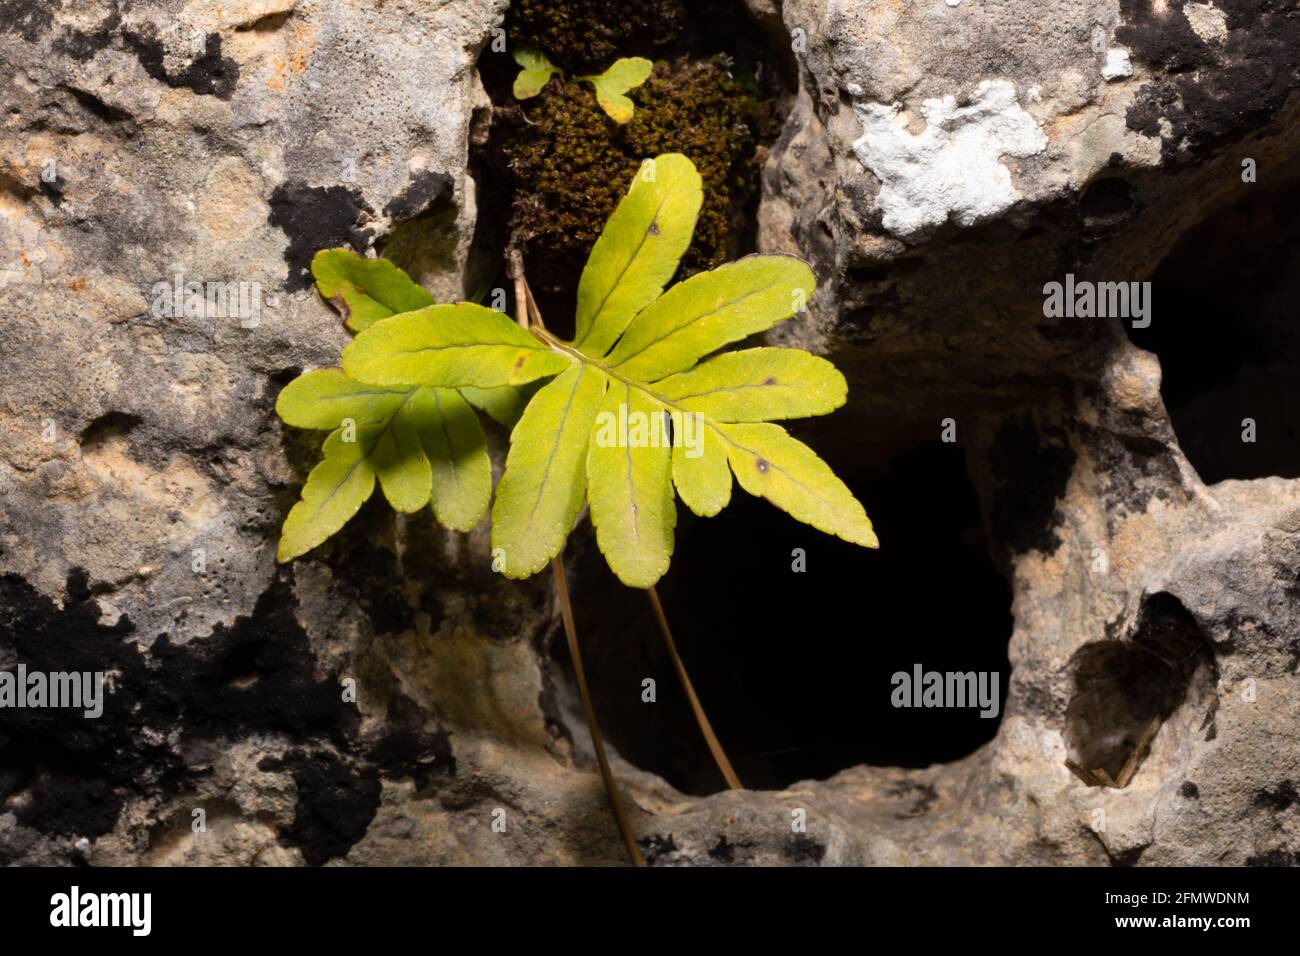 Young green leaf of Polypodium cambricum, the southern  or limestone polypody, a fern between rocks from Majorca Stock Photo